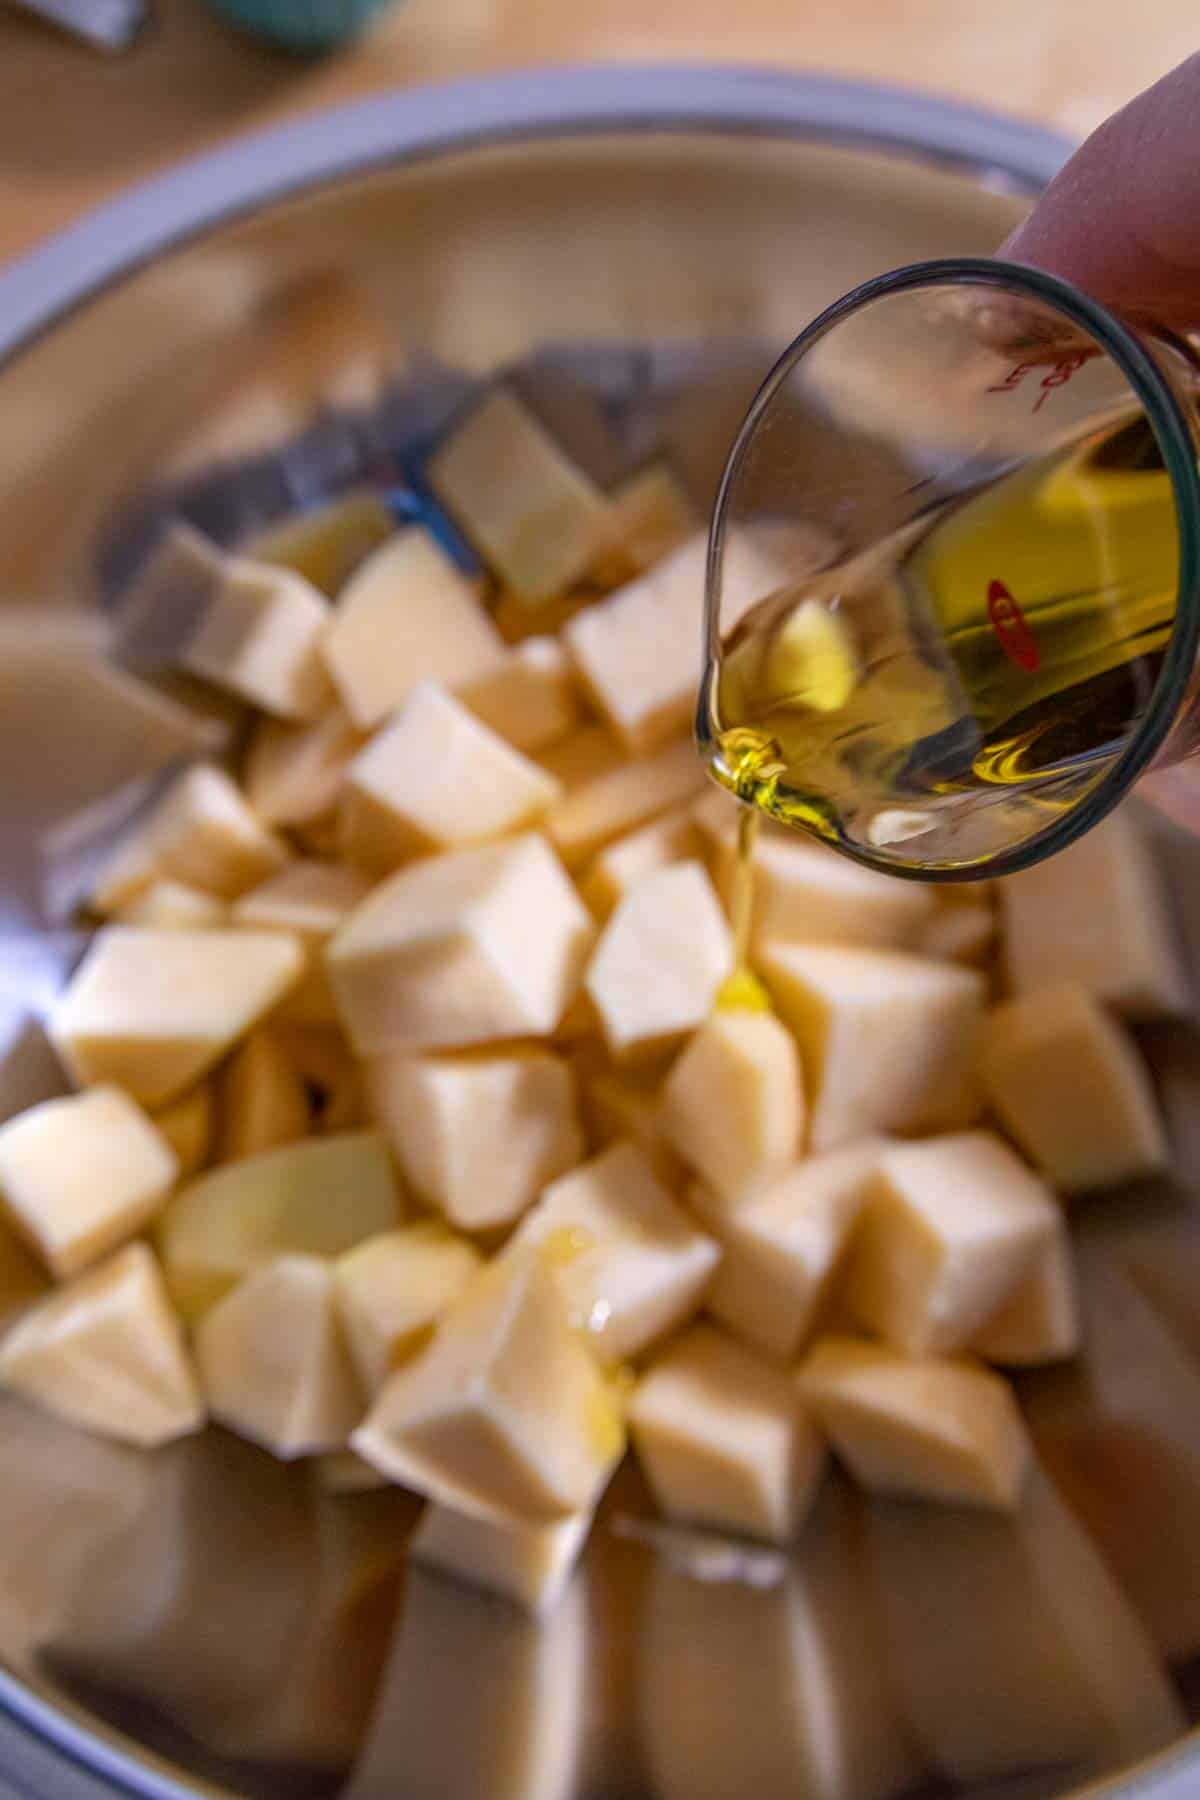 Olive oil being poured onto diced rutabaga in a bowl.